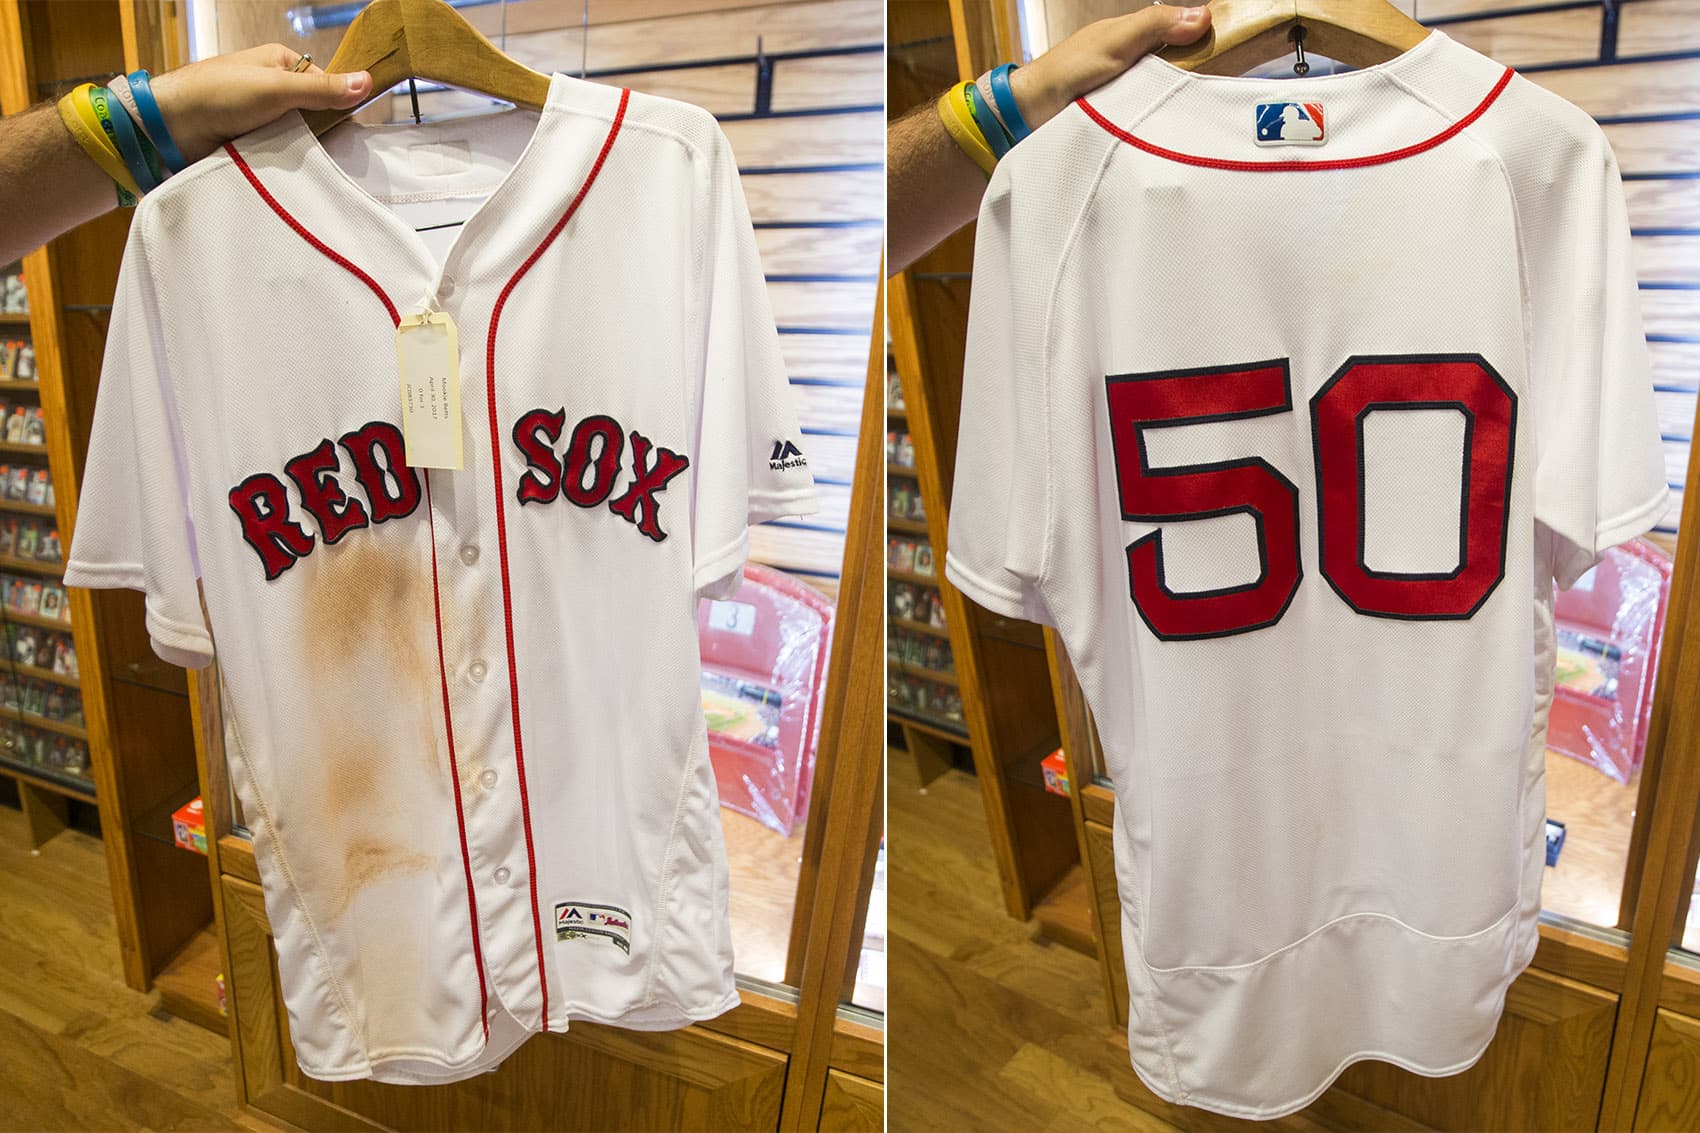 official red sox store